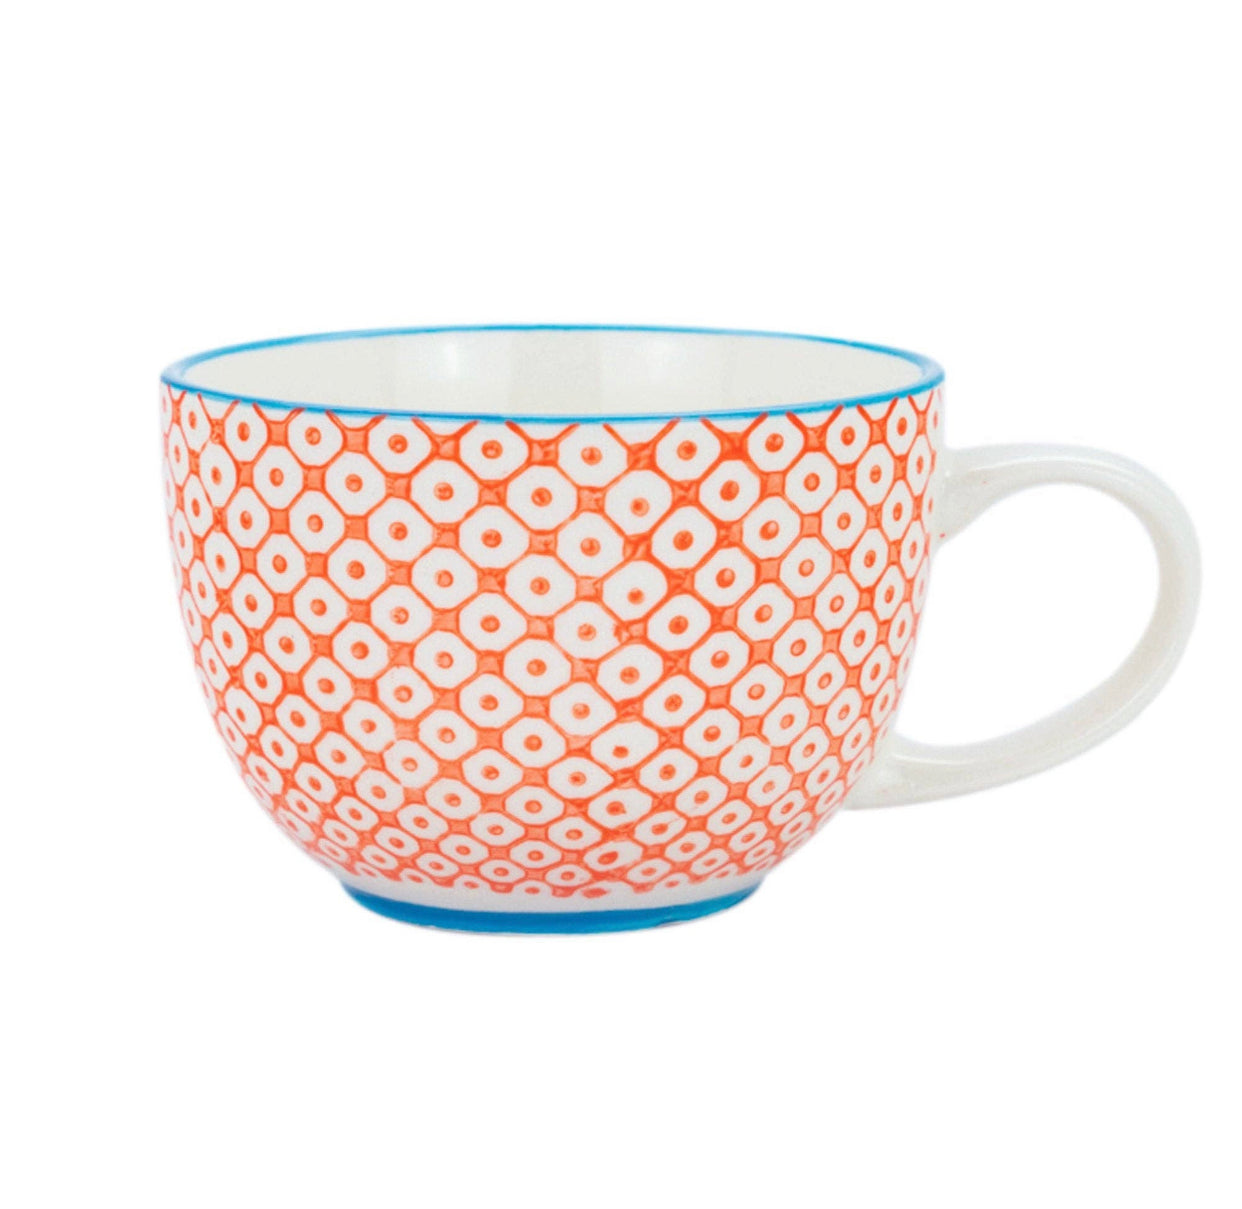 Patterned Cappuccino Cup